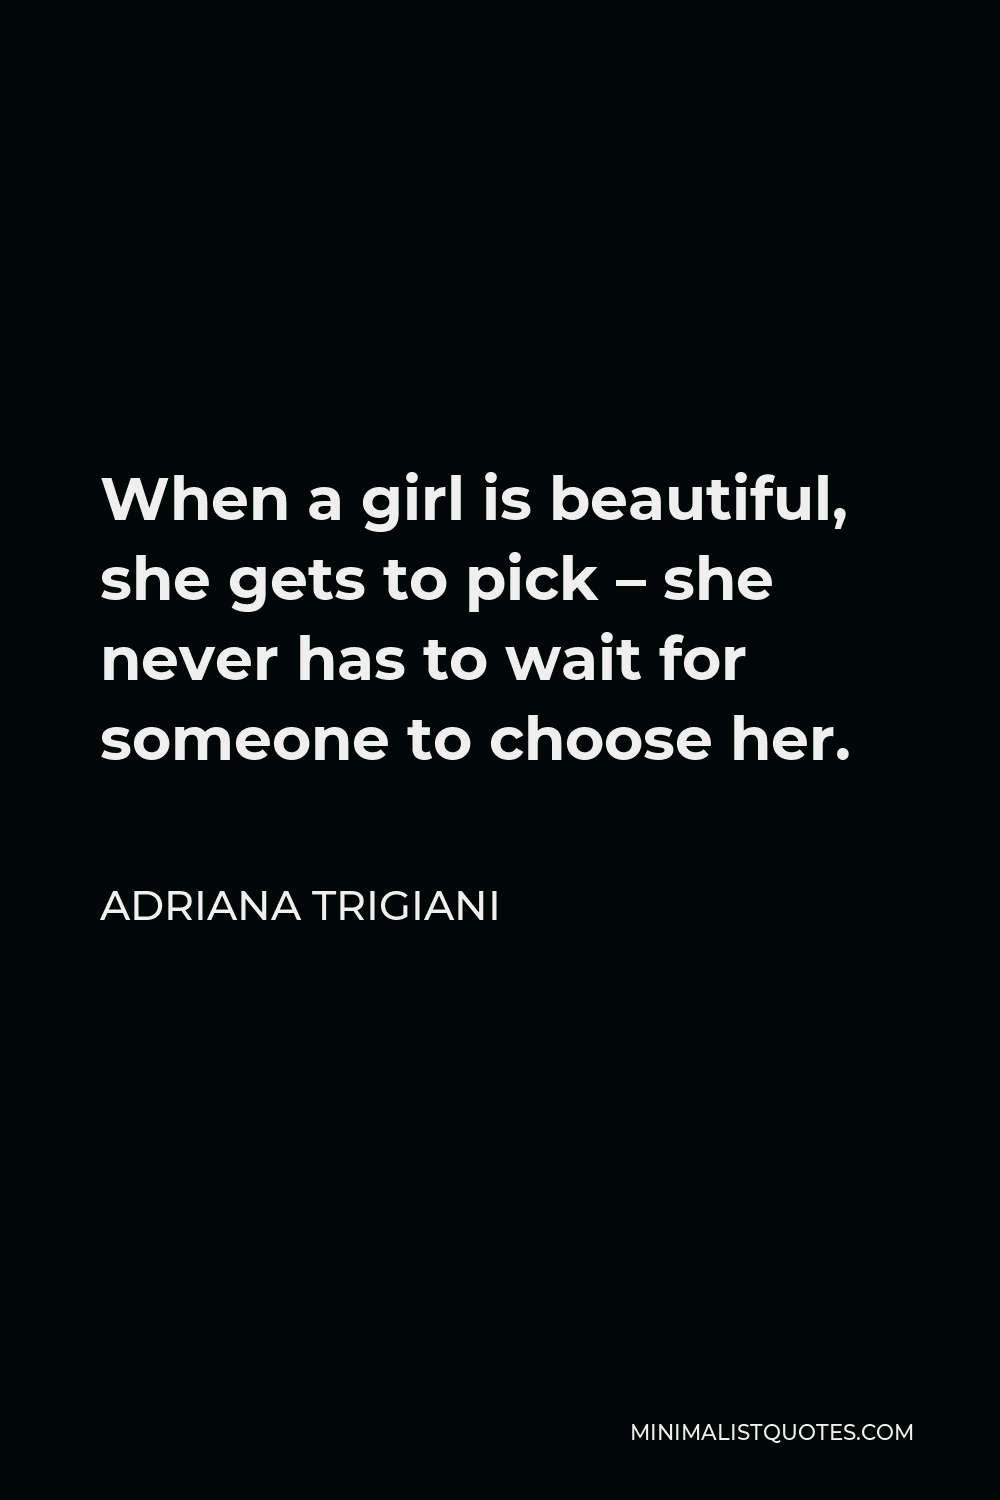 Adriana Trigiani Quote - When a girl is beautiful, she gets to pick – she never has to wait for someone to choose her.